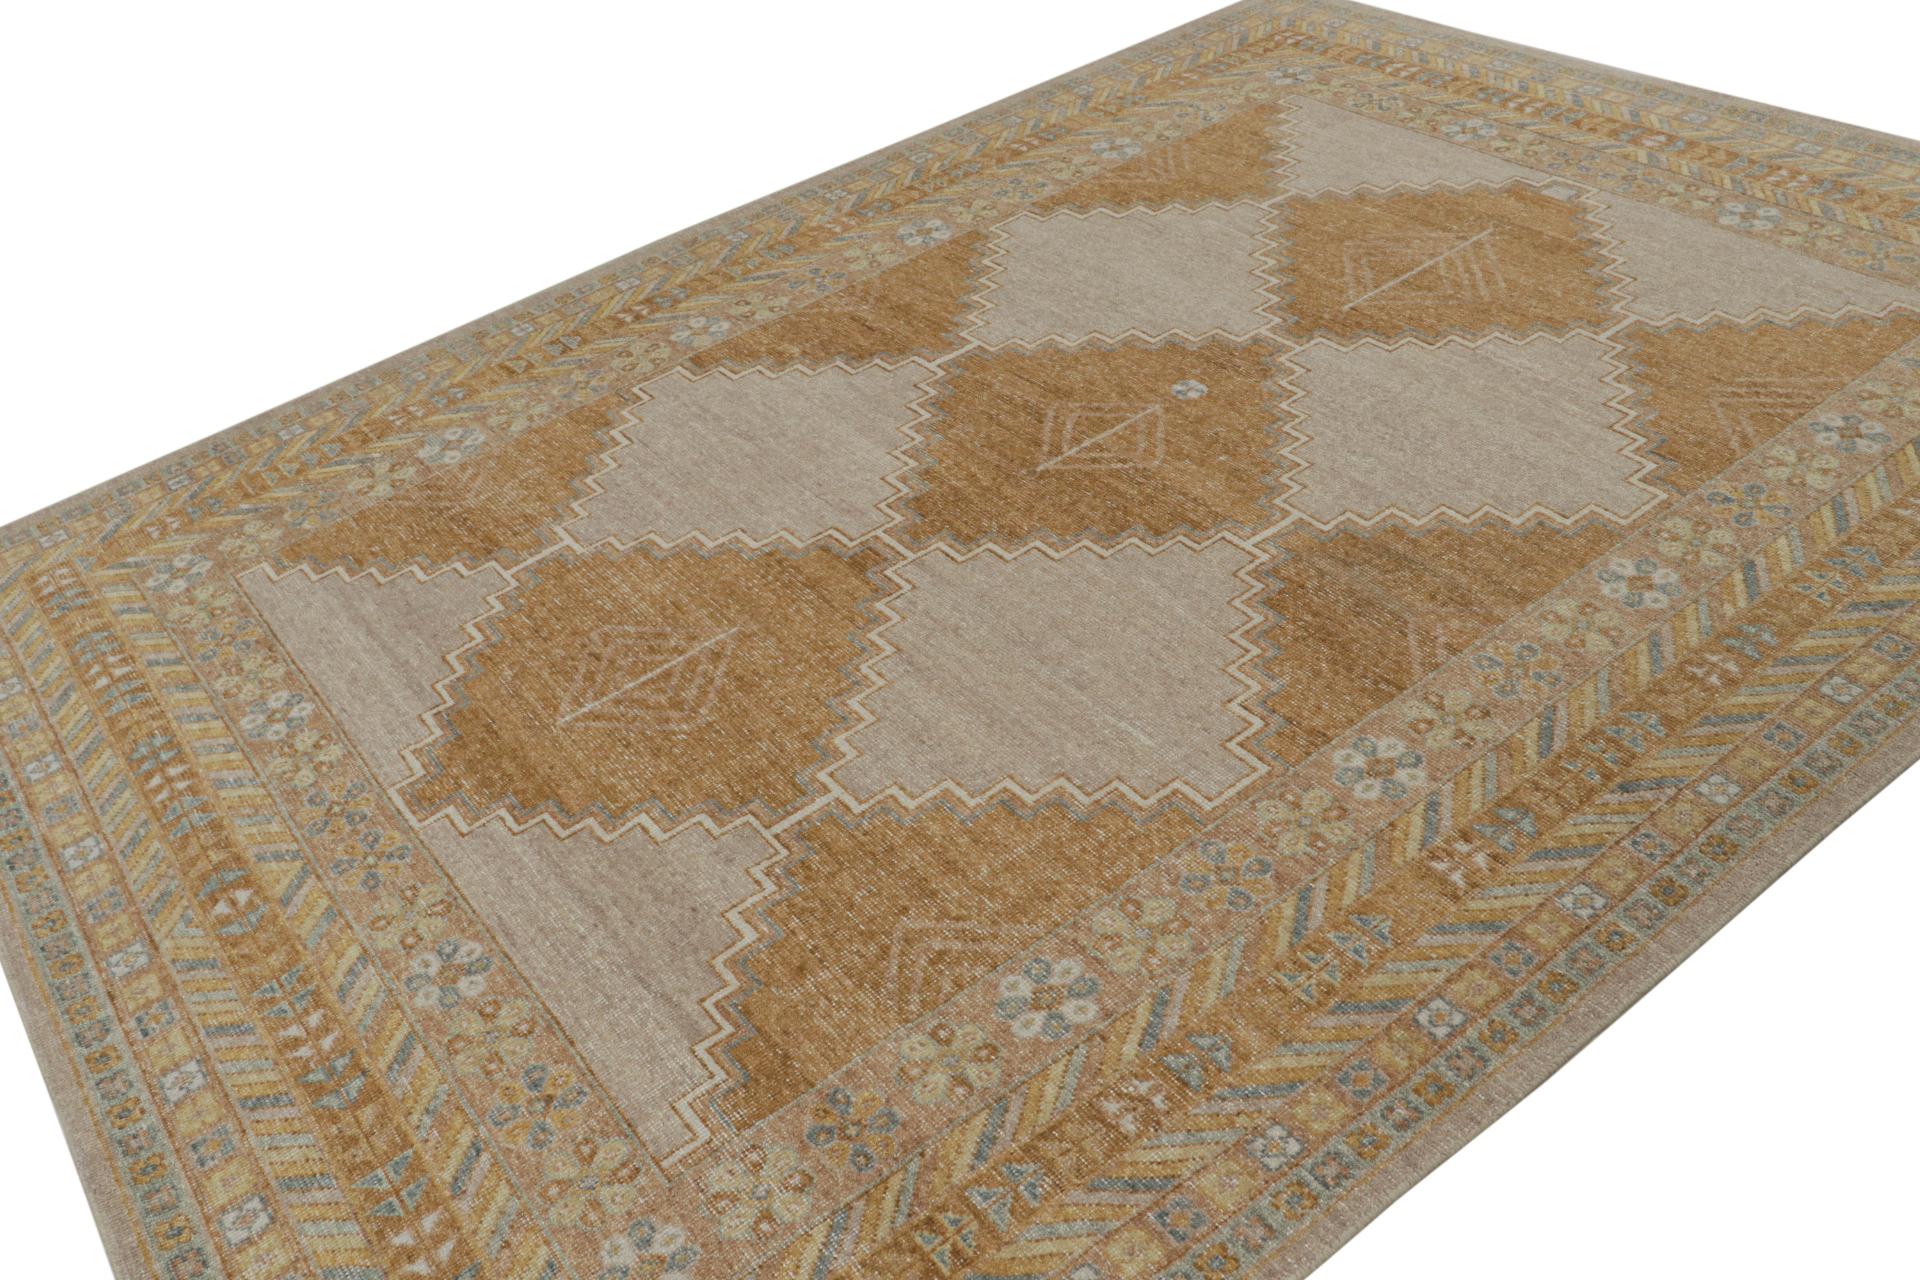 This 8×11 rug is a new addition to Rug & Kilim’s Homage Collection. Hand-knotted in wool, it recaptures an antique tribal rug pattern in a new take on distressed texture.

On the Design: 

One can’t help but admire the balance of warm and cool